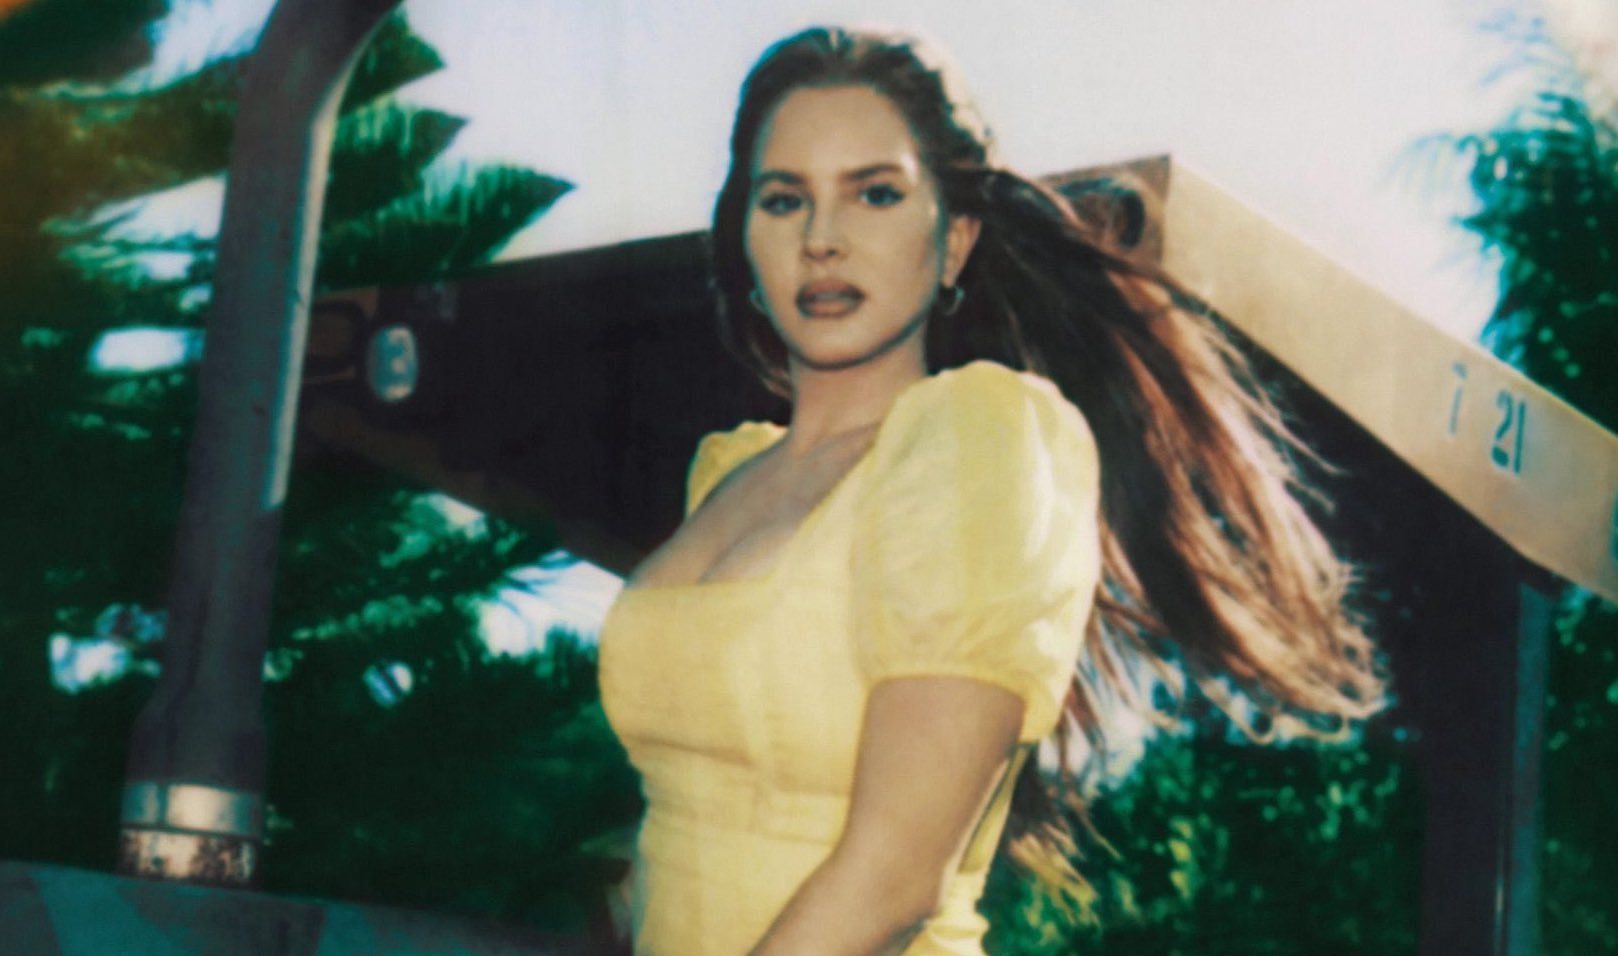 A woman in a yellow dress standing in front of a TV - Lana Del Rey